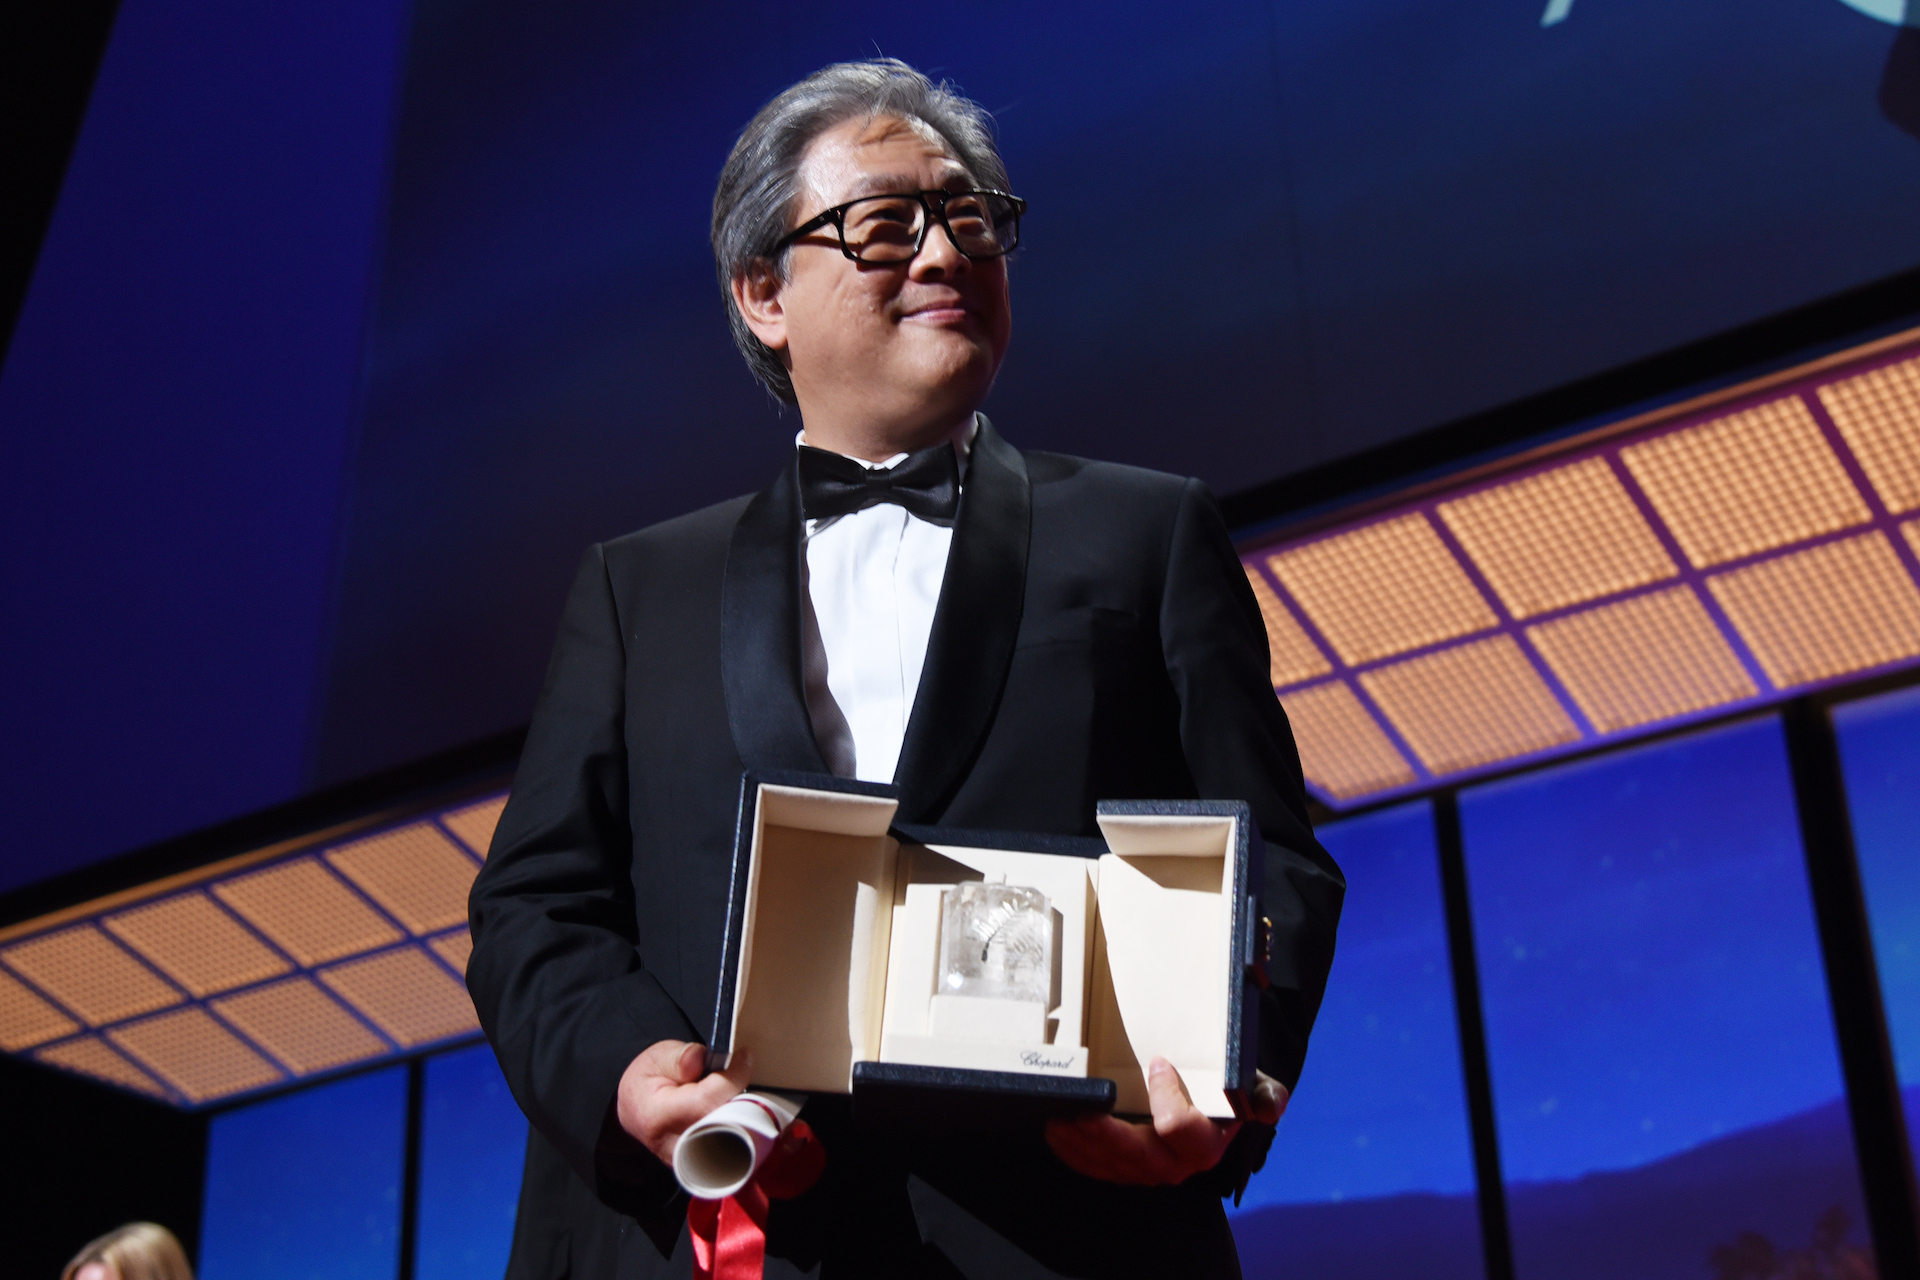 Award for Best Director - Park Chan-wook